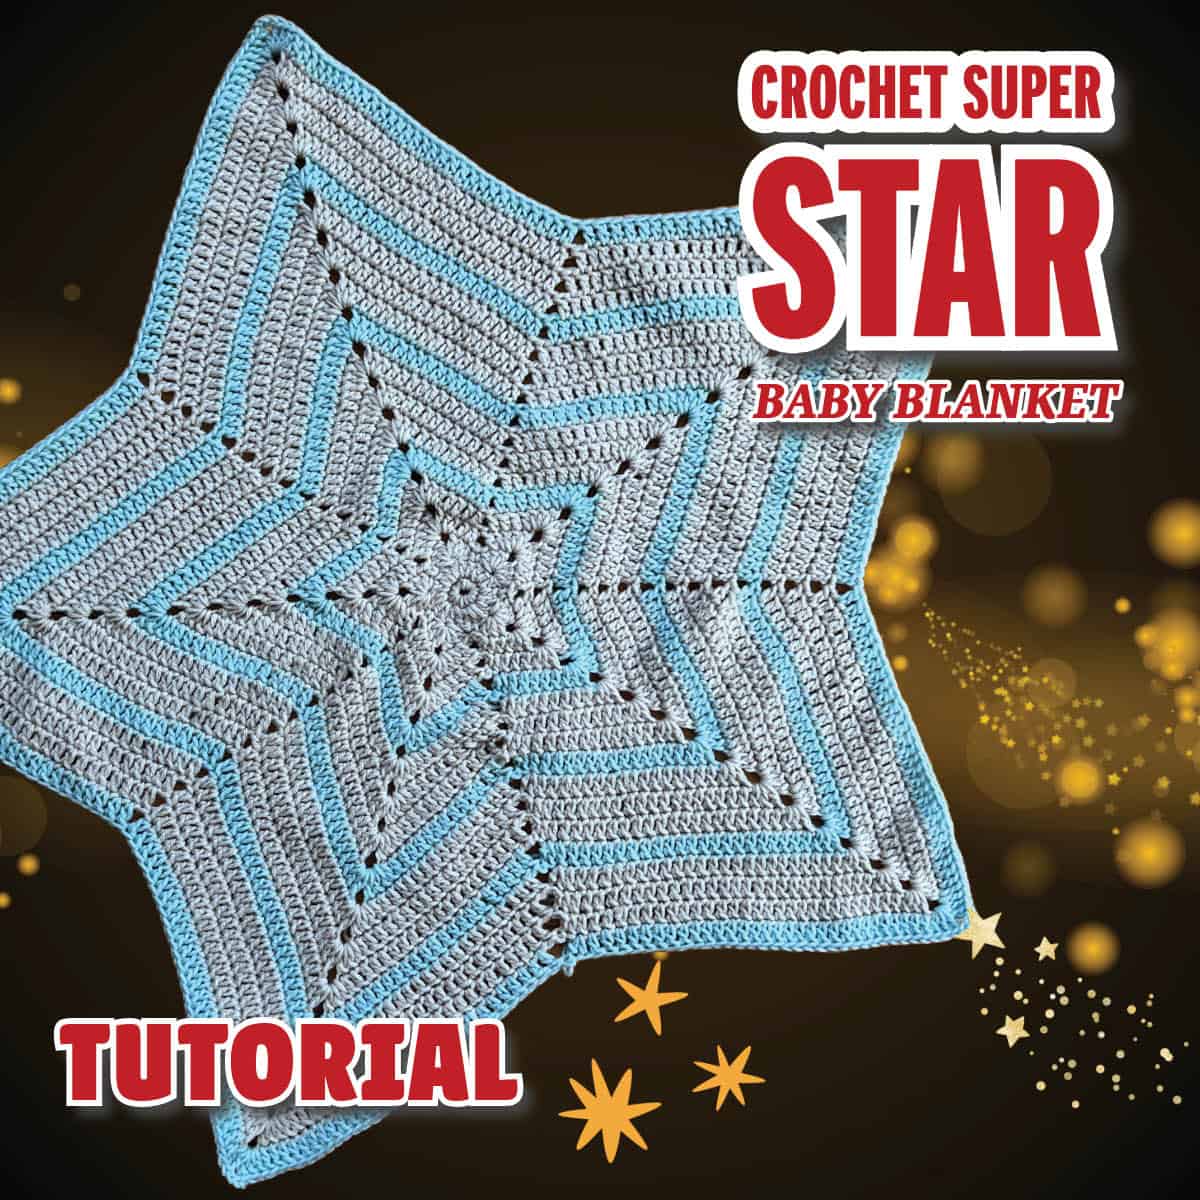 Crochet A Super Star Baby Blanket with Tutorial